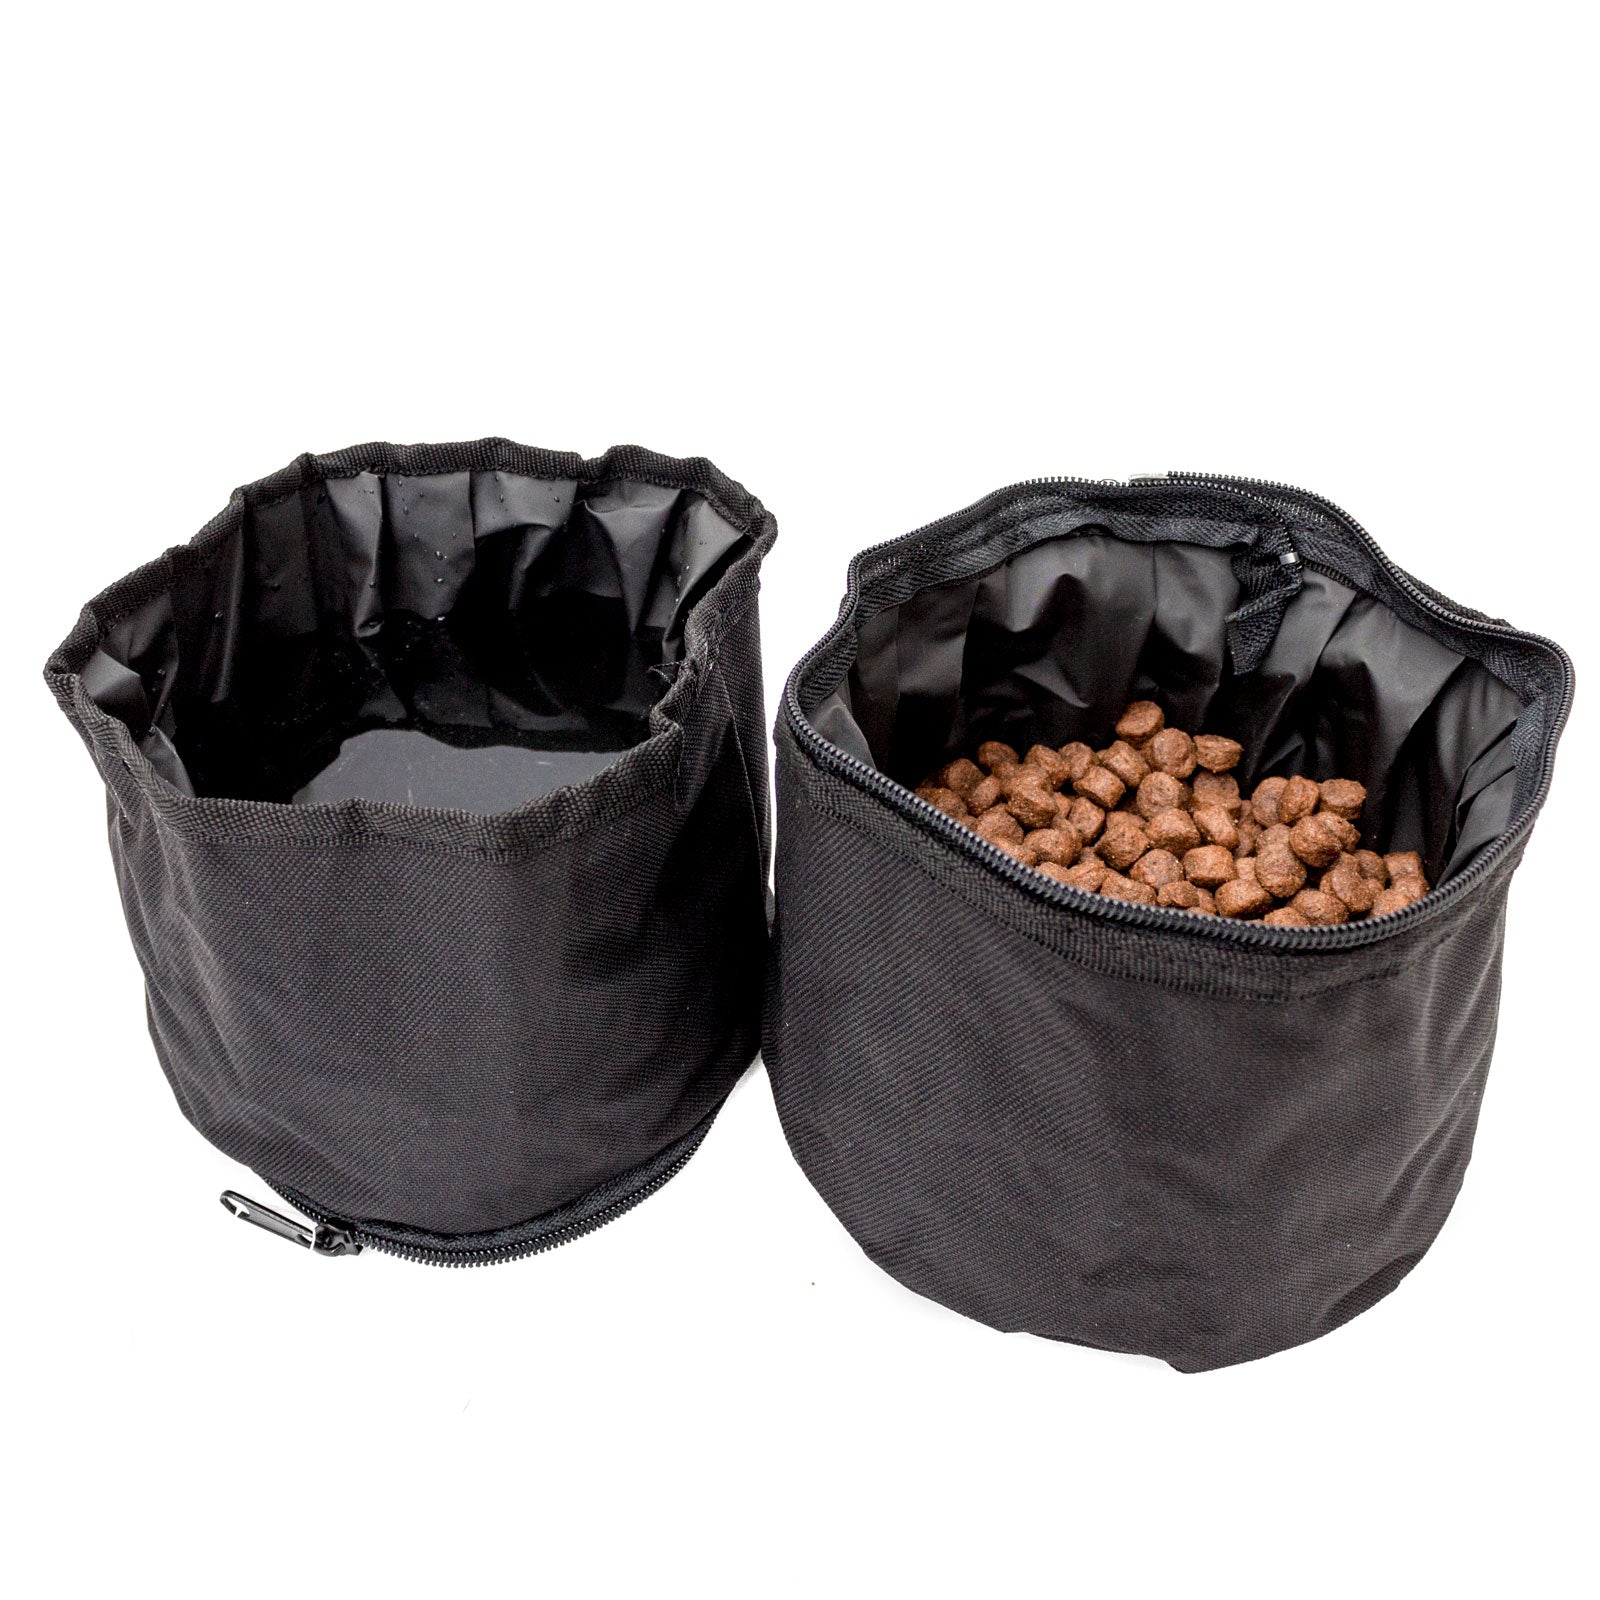 Golden Retriever - Double Portable Travel Dog Bowl - Food And Water